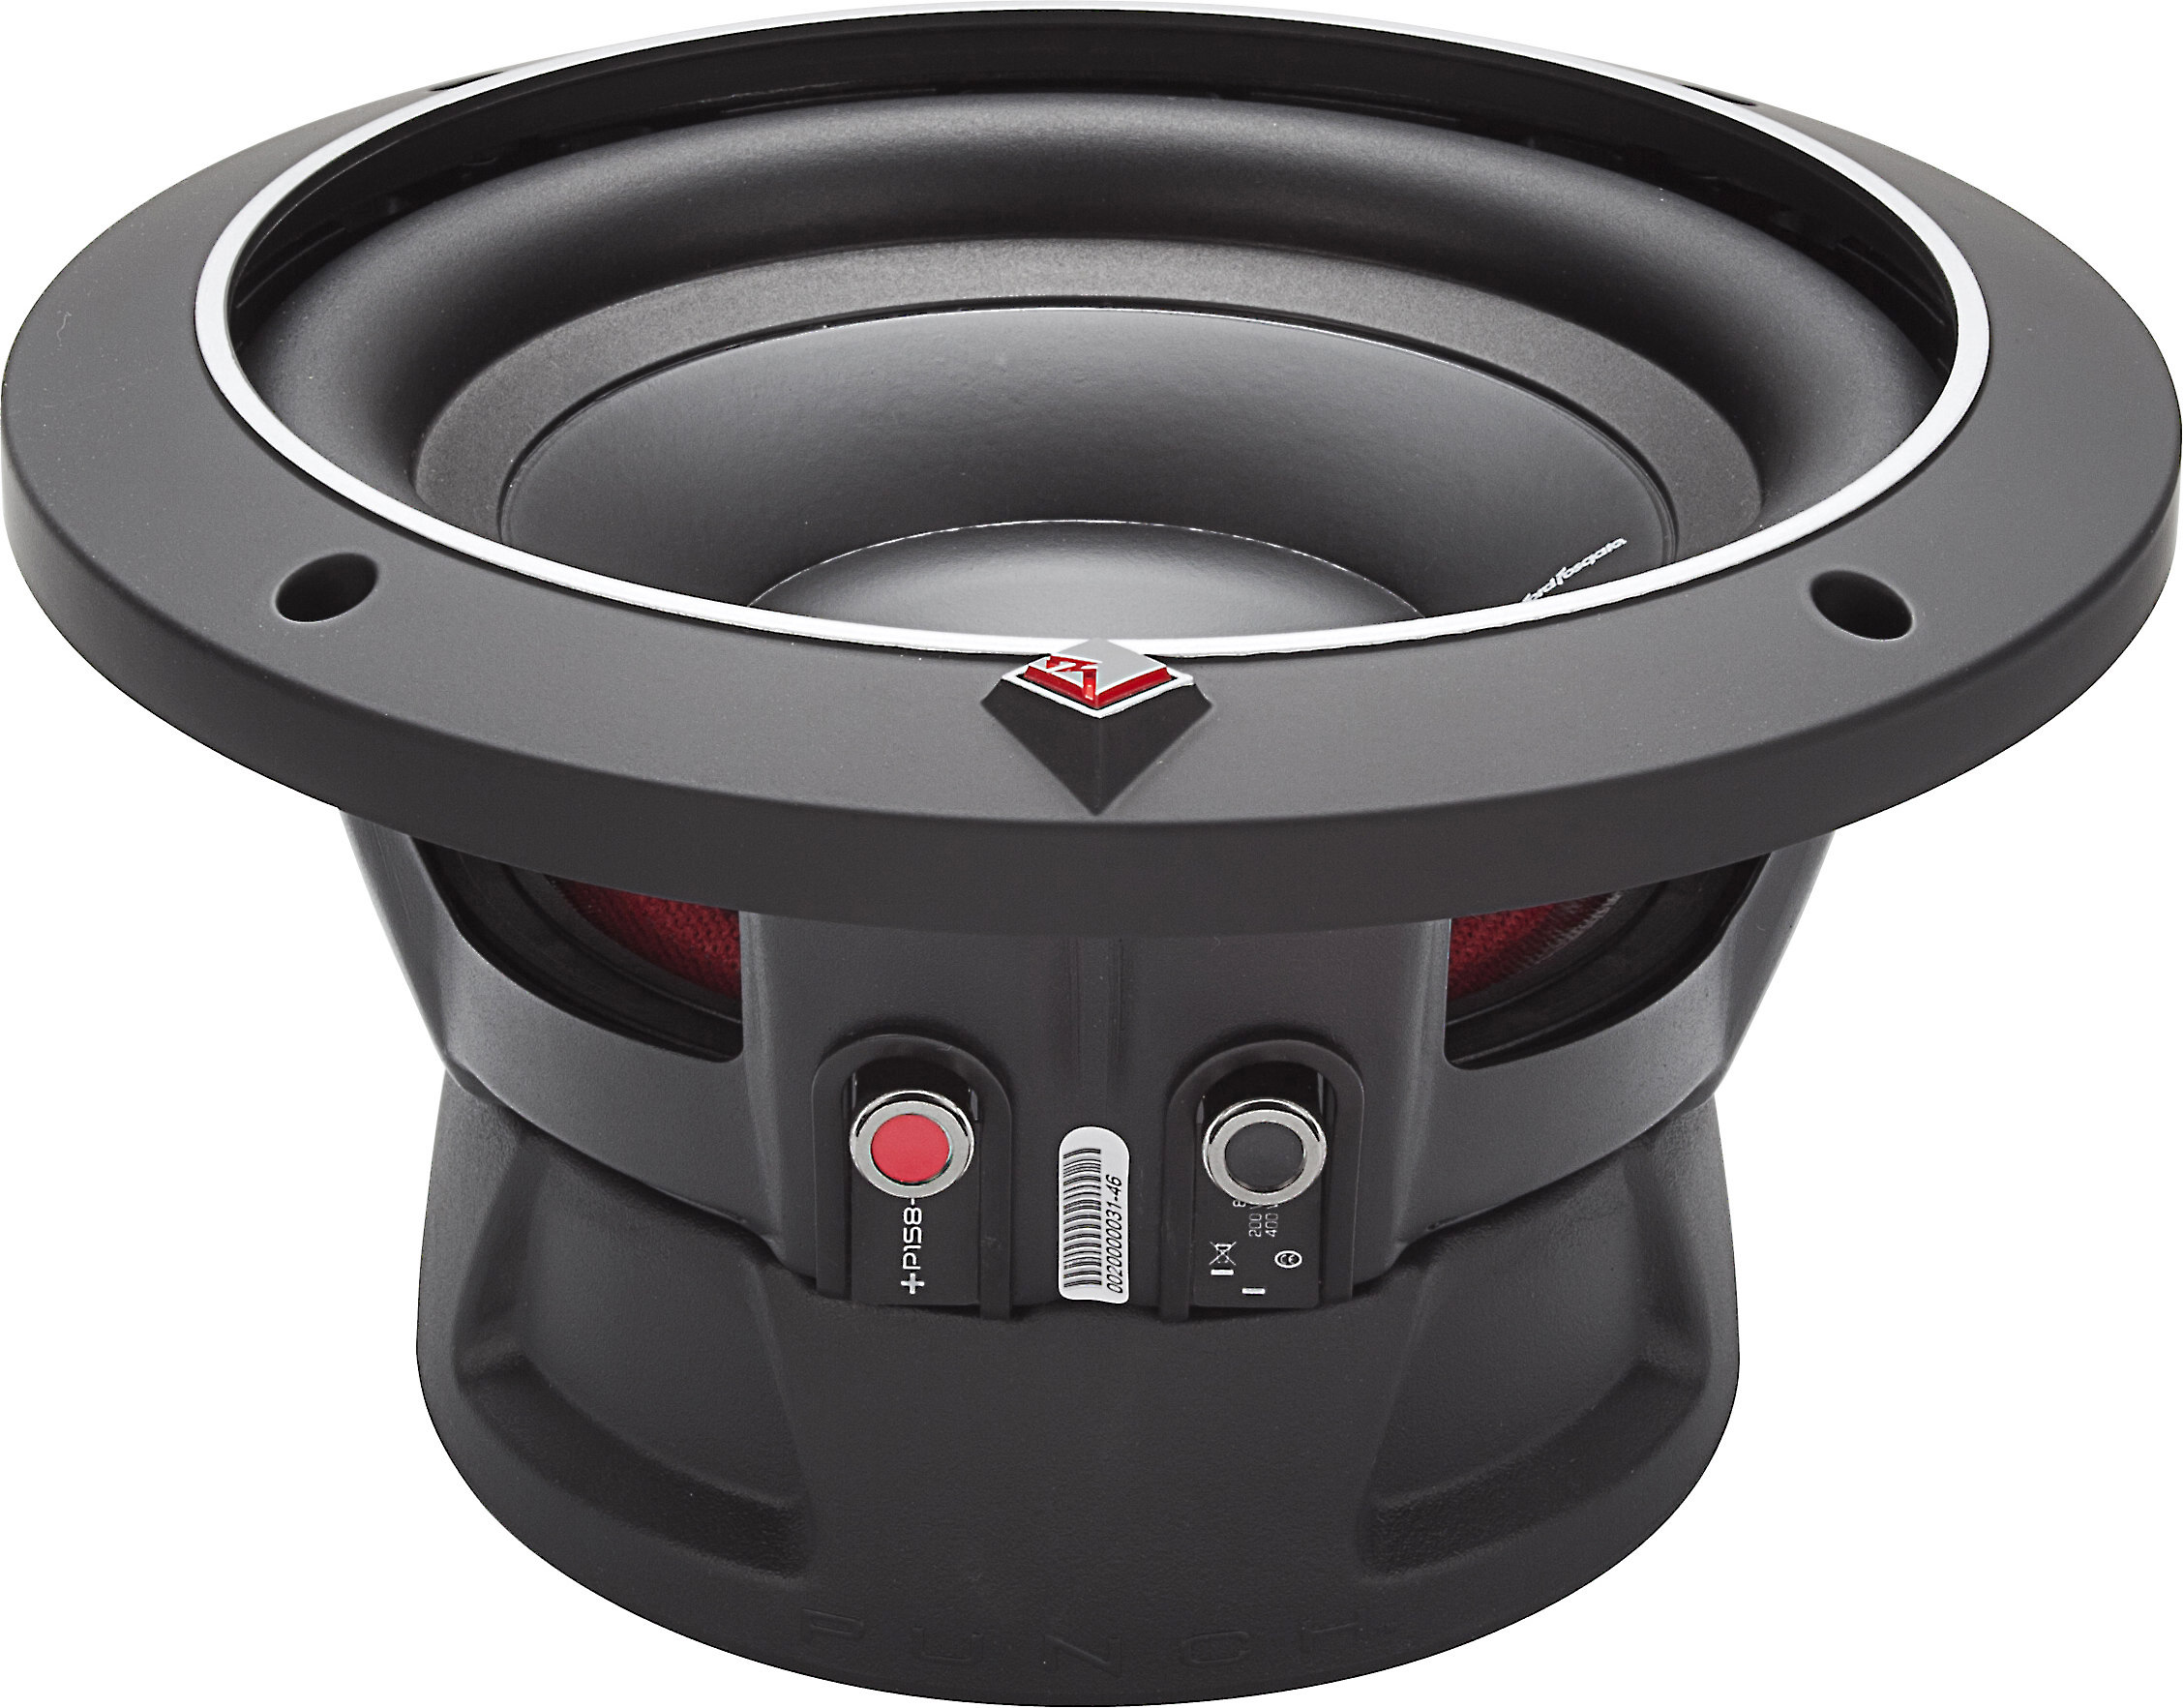 Rockford Fosgate Punch P1S4-8 Punch P1 